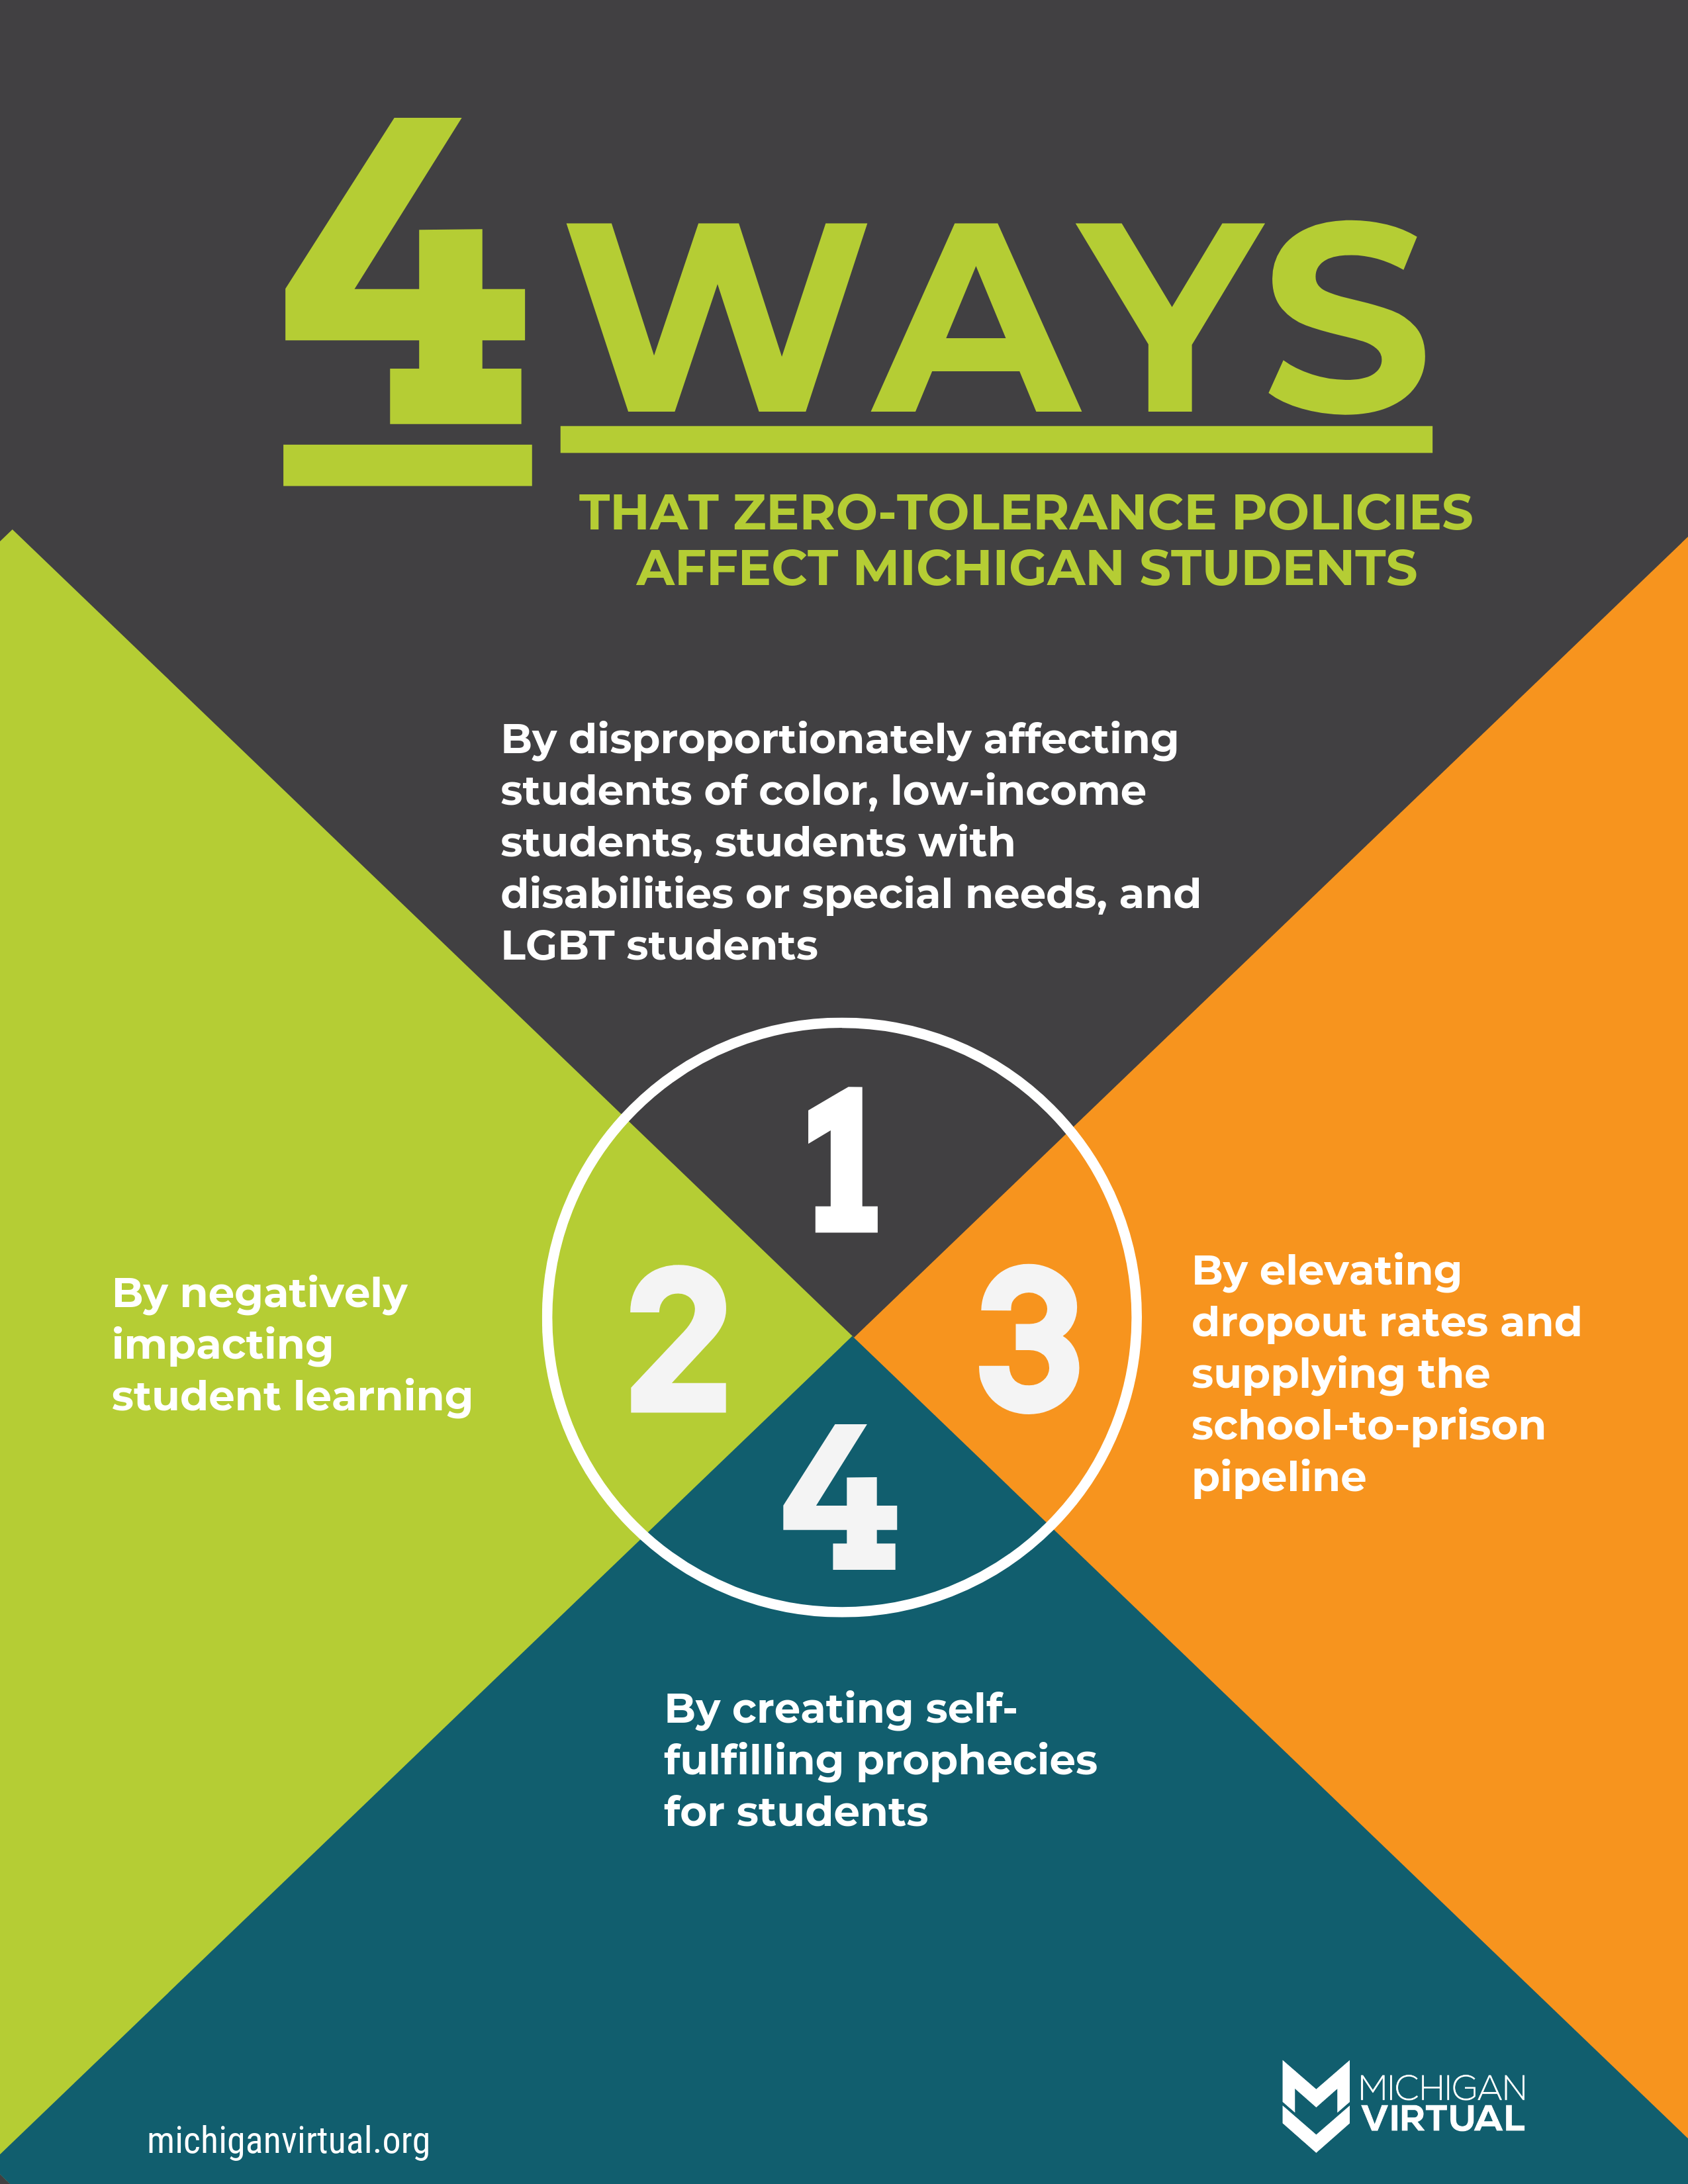 4 Ways that Zero Tolerance Policies Affect Michigan Students: 1) By disproportionately affecting students of color, low-income students, students with disabilities or special needs, and LGBT students, 2) By negatively impacting student learning, 3) By elevating dropout rates and supplying the school-to-prison pipeline, and 4) By creating self-fulfilling prophecies for students